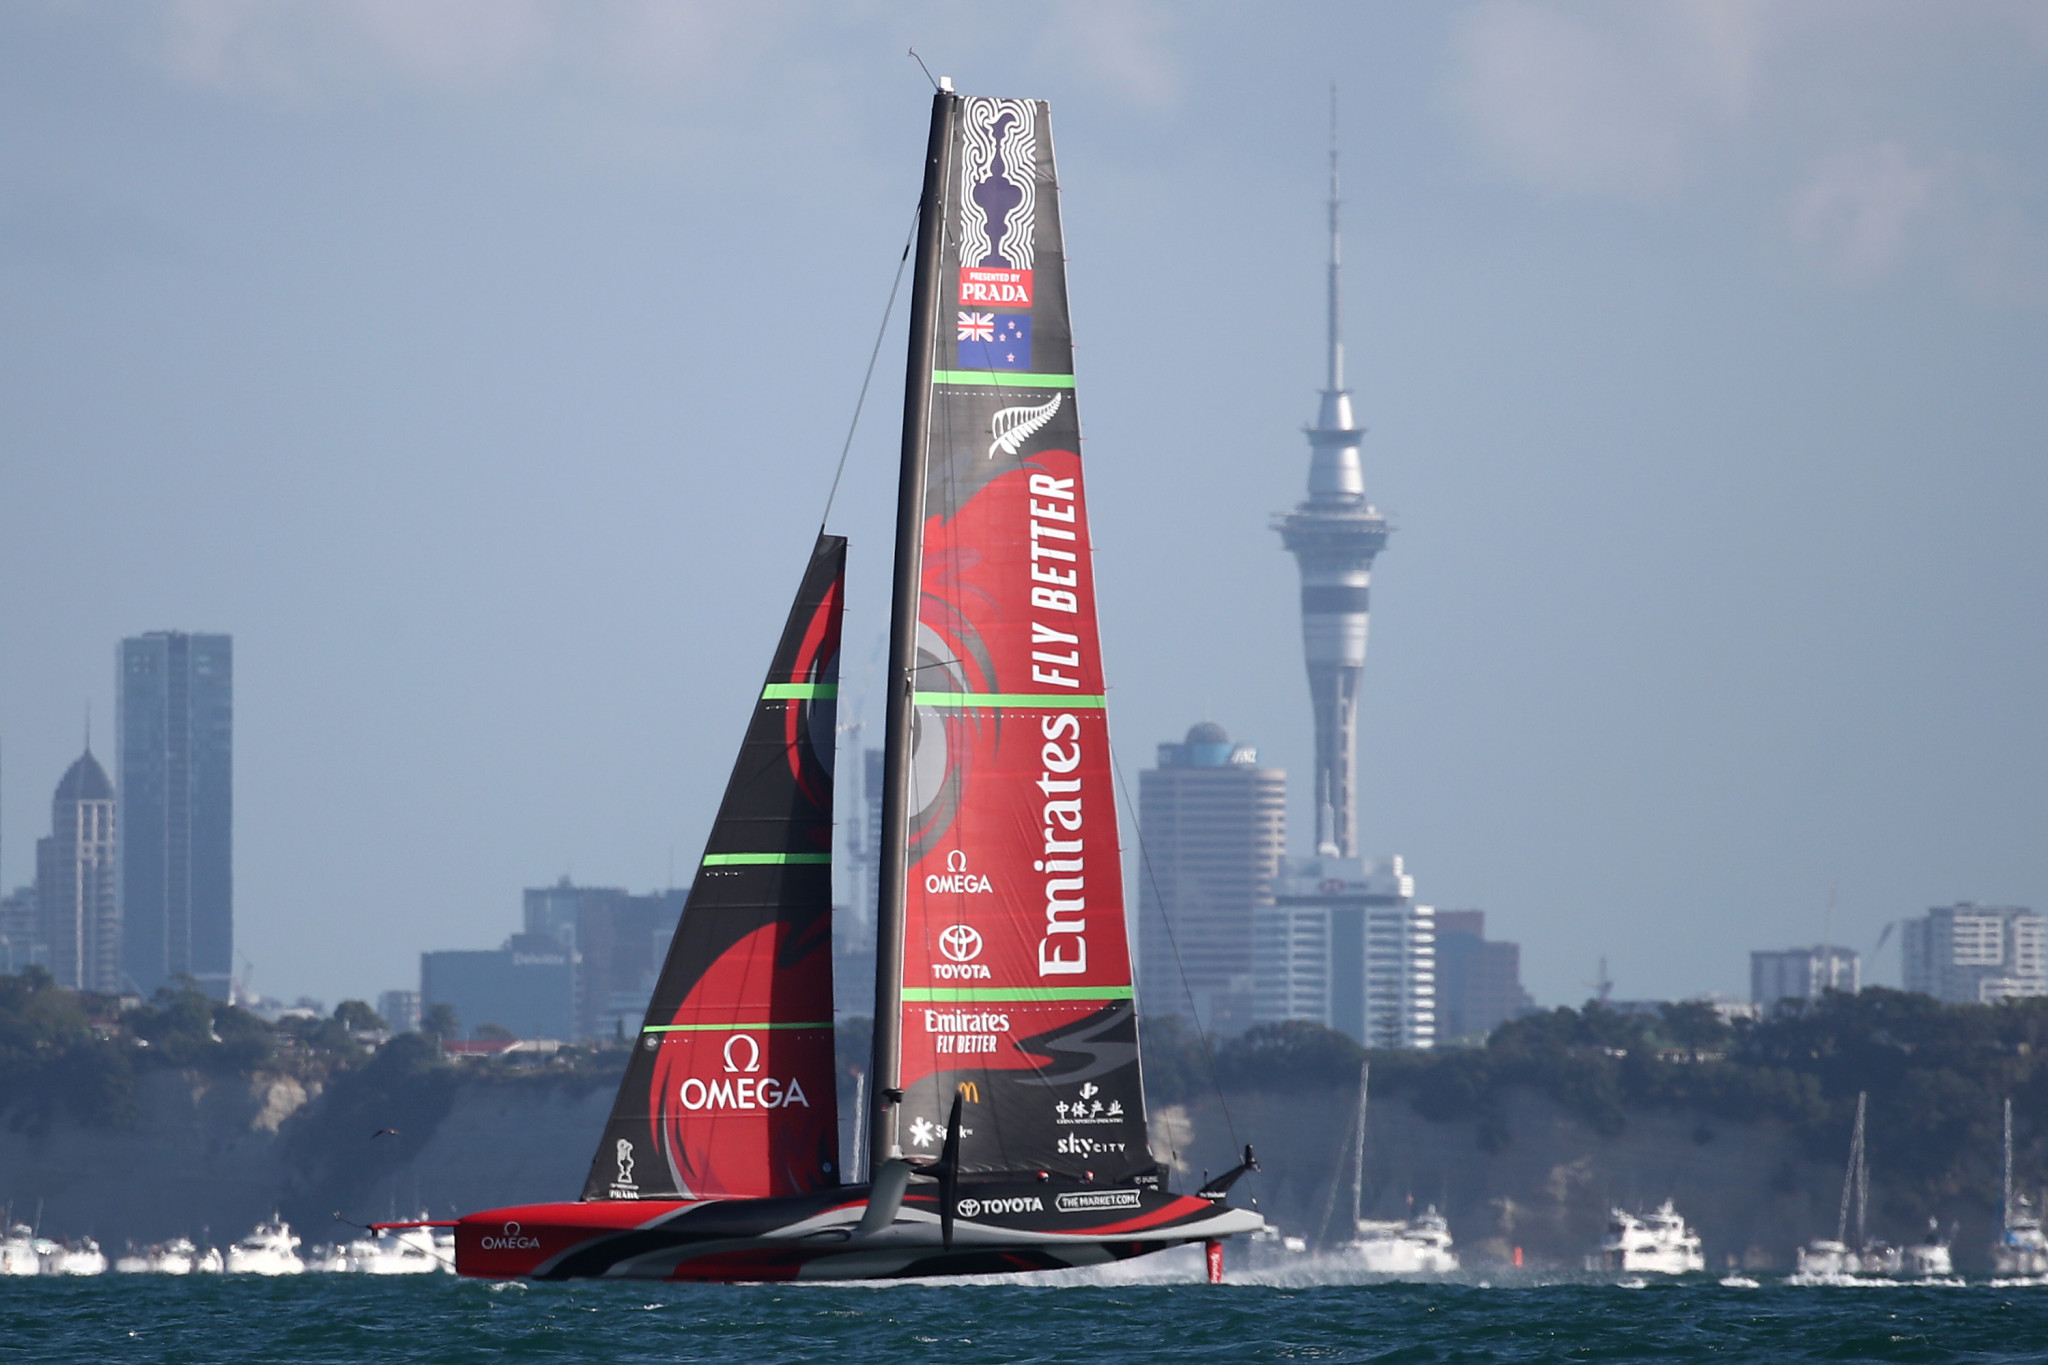 Venue for 37th America's Cup expected to be announced in March